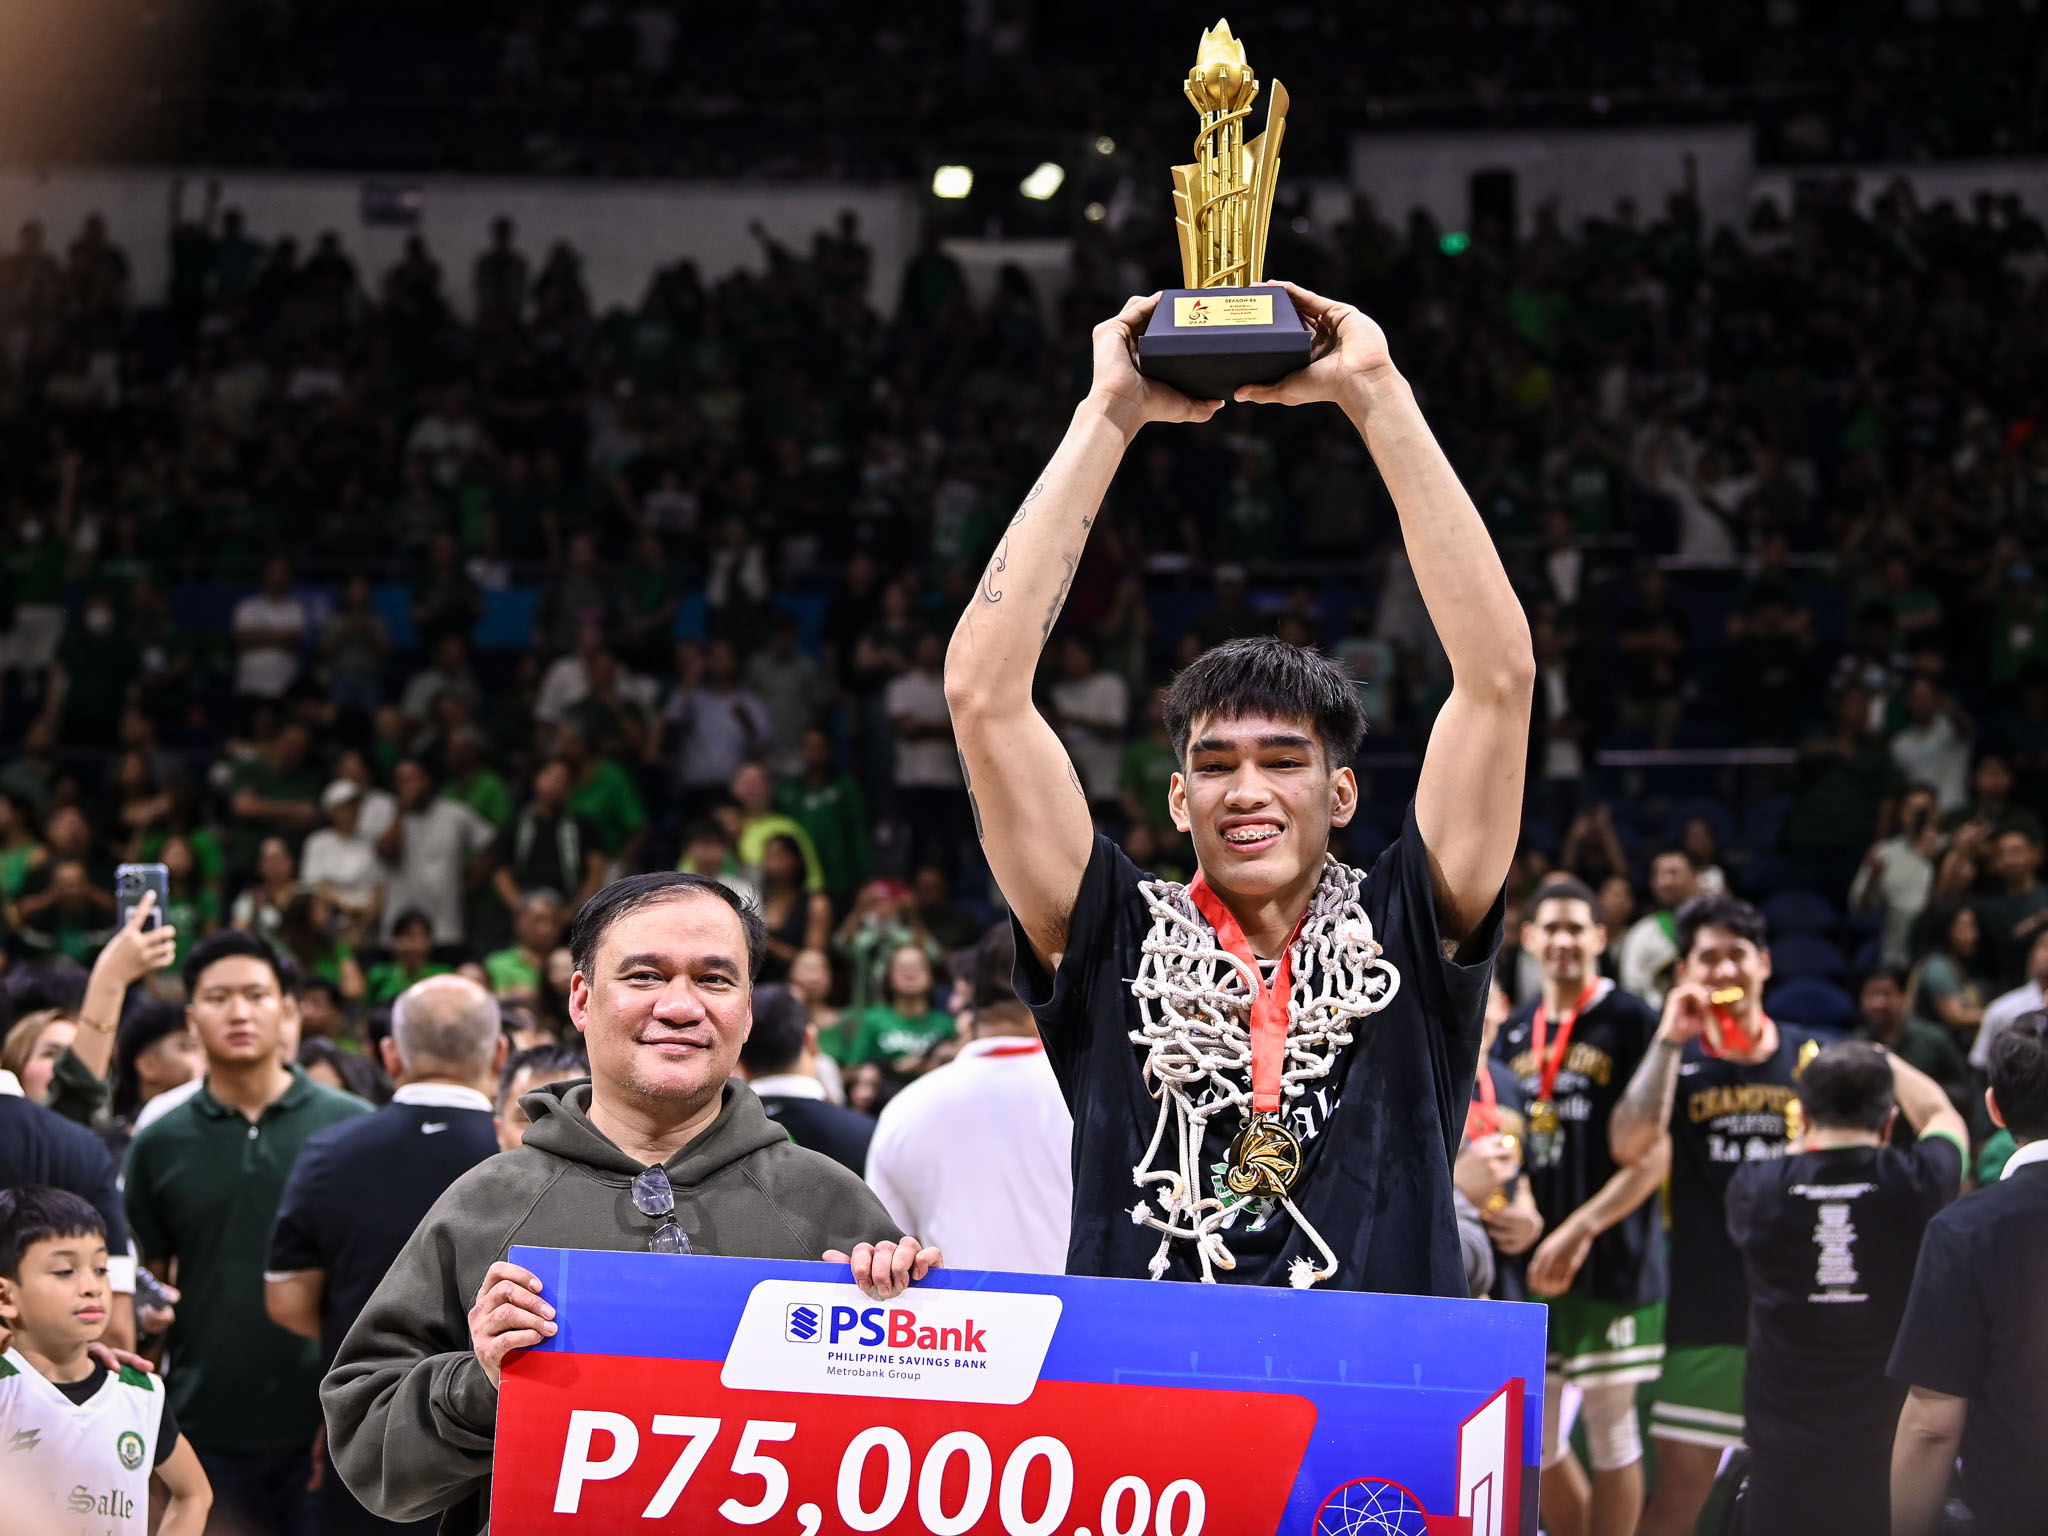 UAAP86-MBB-G3-FINALS-MVP-Kevin-Quiambao-8322 Animo is Back: La Salle claims UAAP glory, defeats UP in nail-biting Game 3 for first MBB title in 7 Years Basketball DLSU News UAAP UP  - philippine sports news